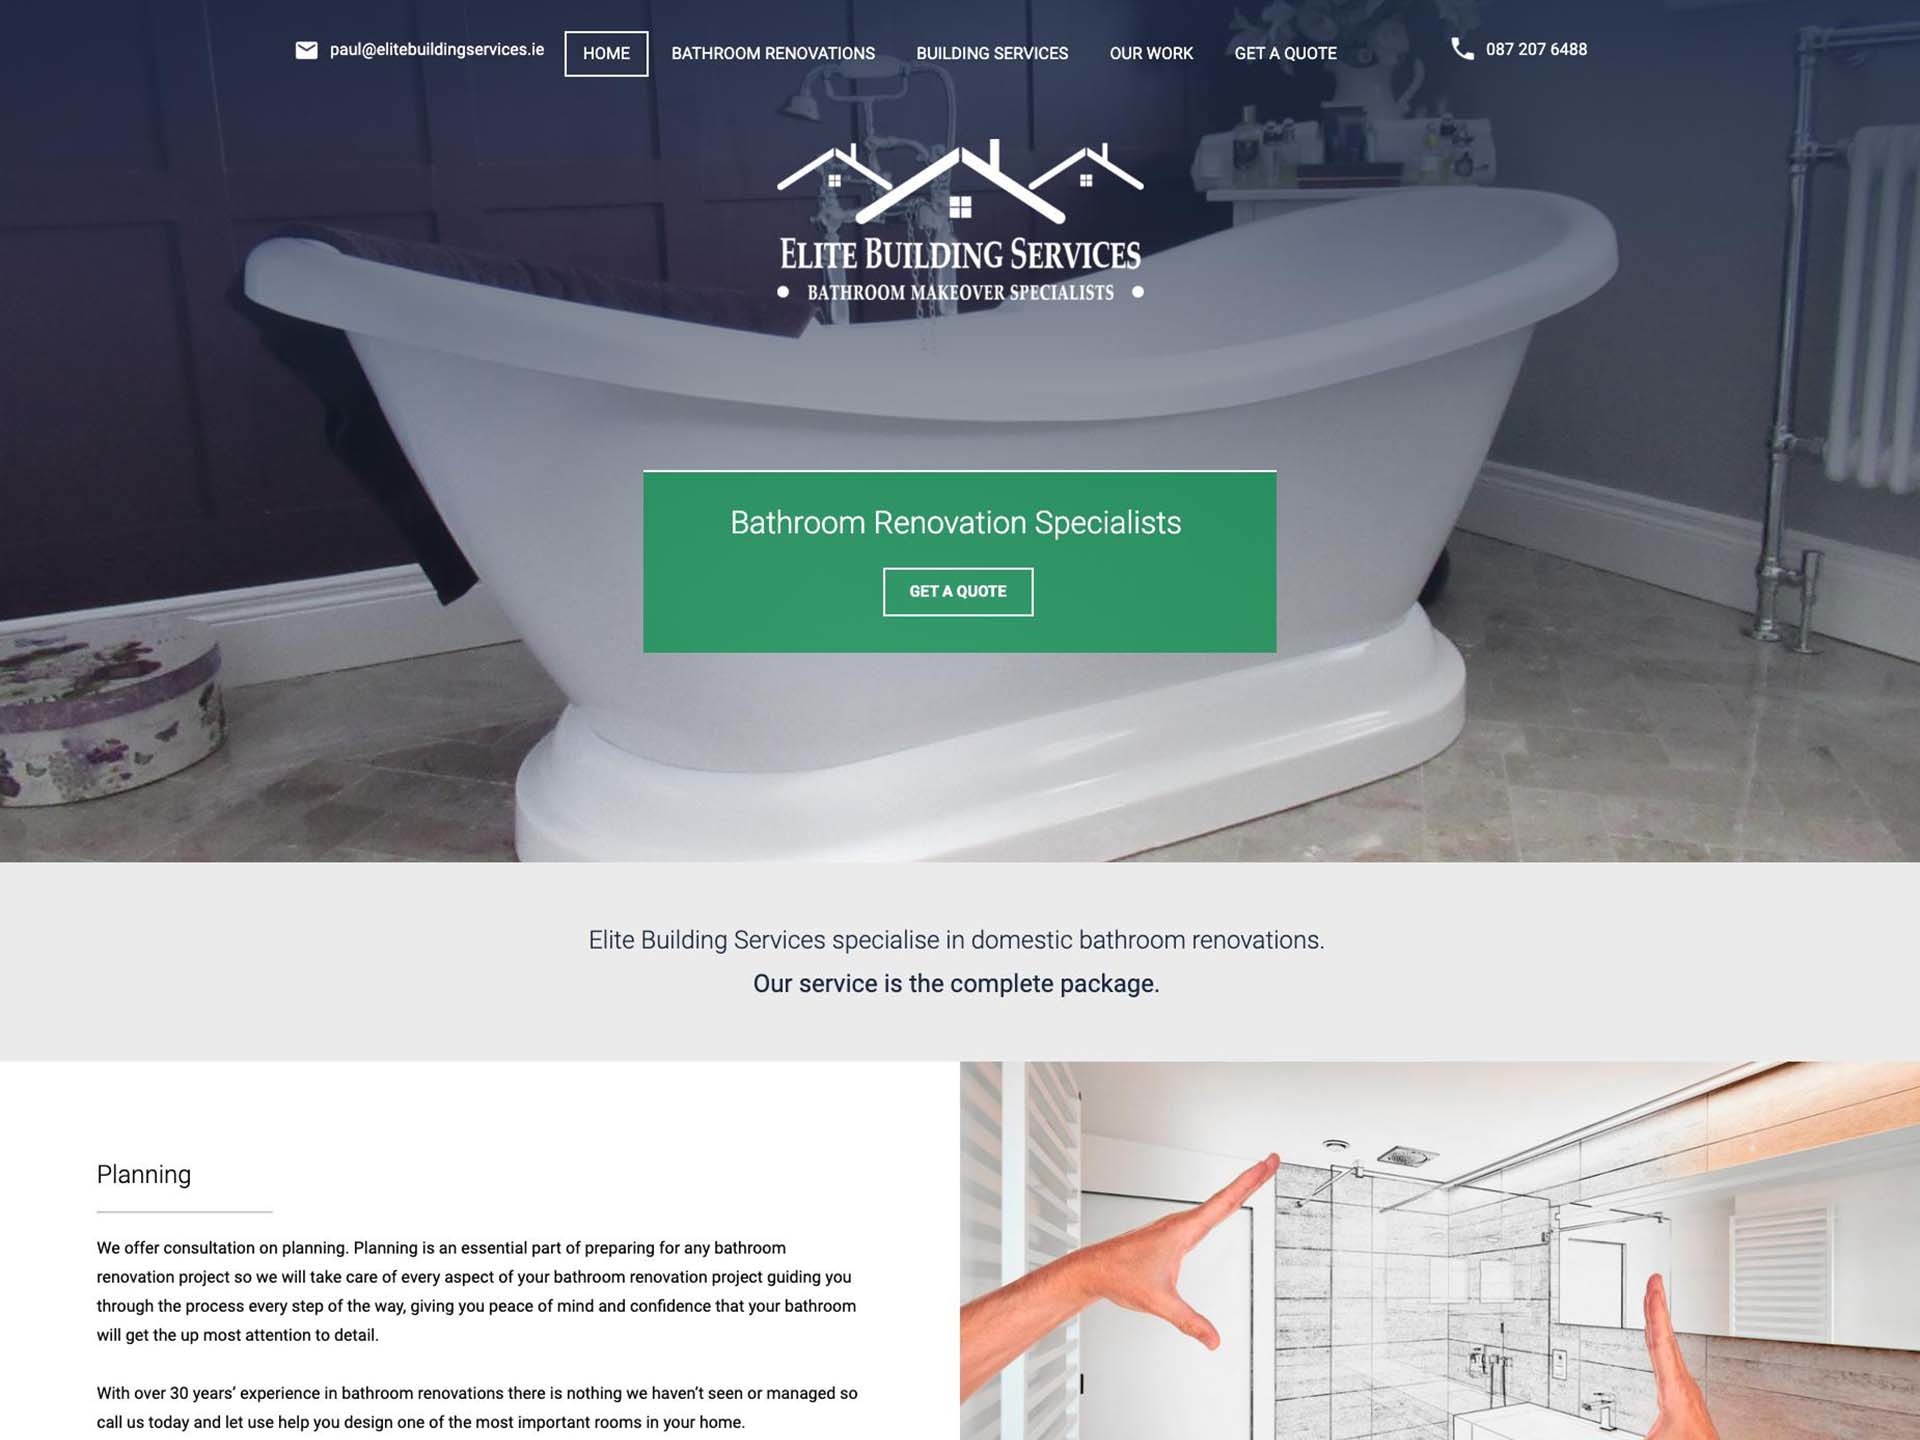 The Elite Building Services website created by it'seeze Dublin